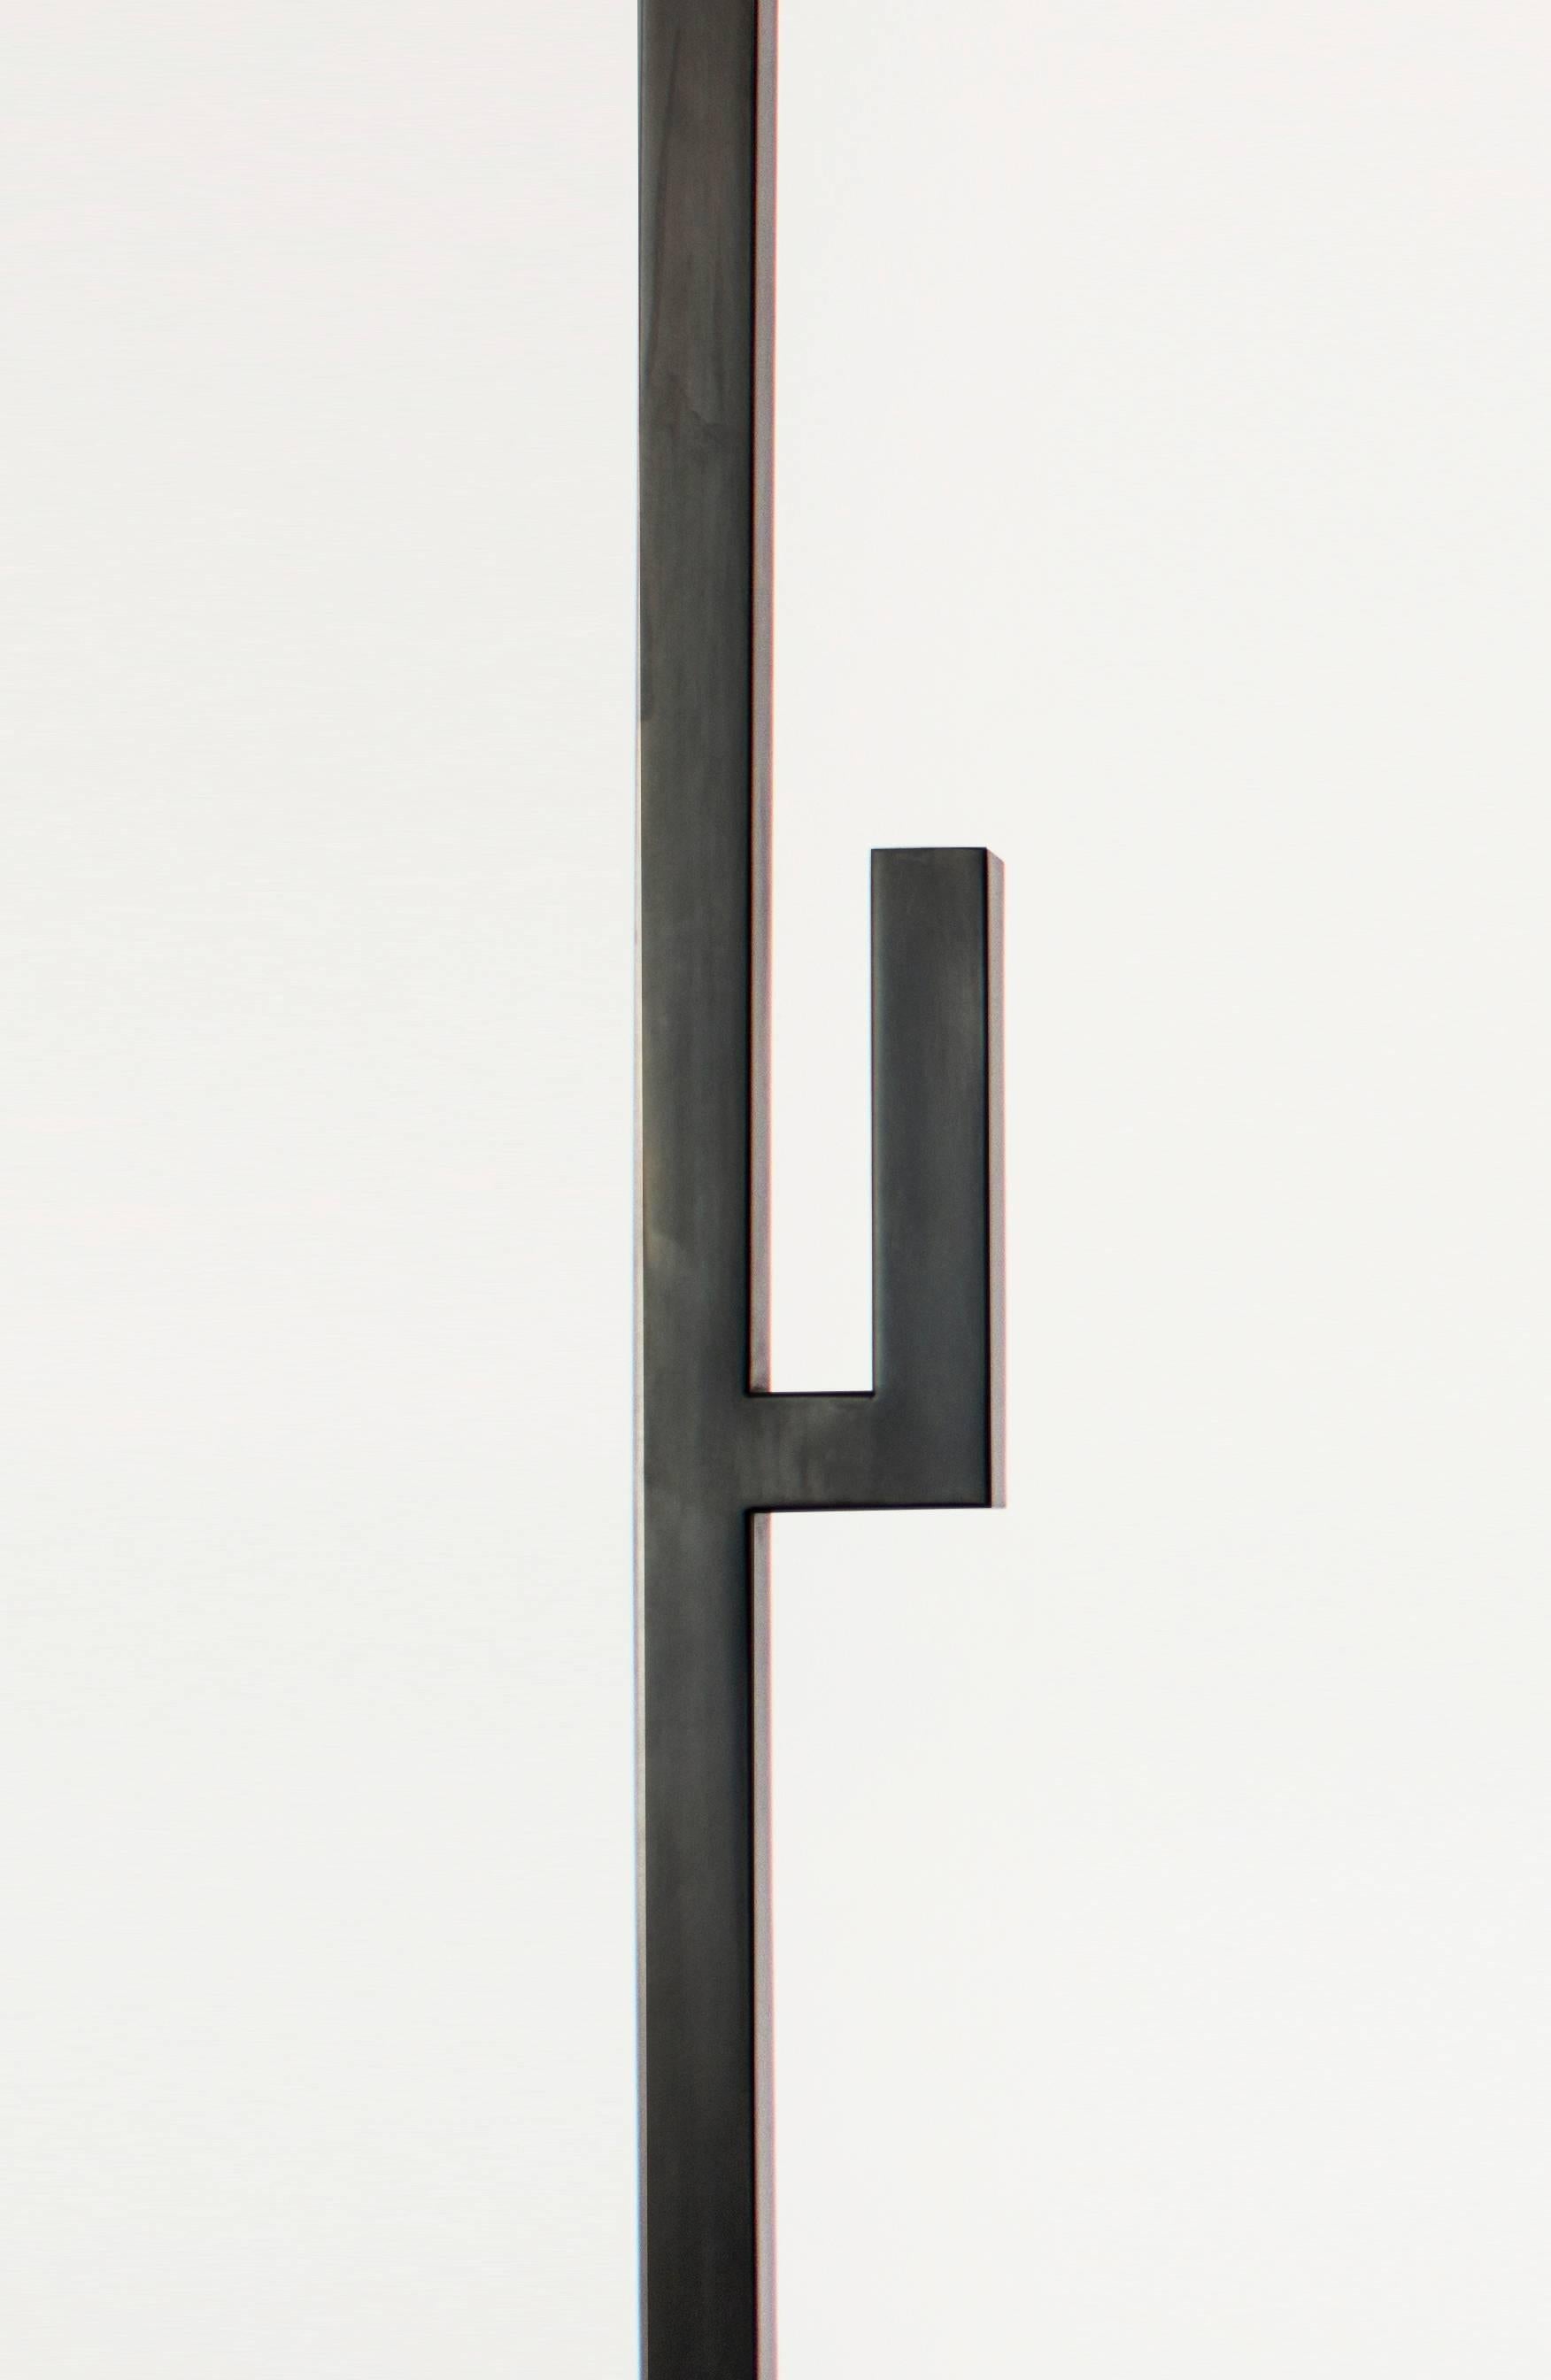 American Contemporary 'Portmanteau HIM' Coat Rack by Material Lust, 2014 For Sale